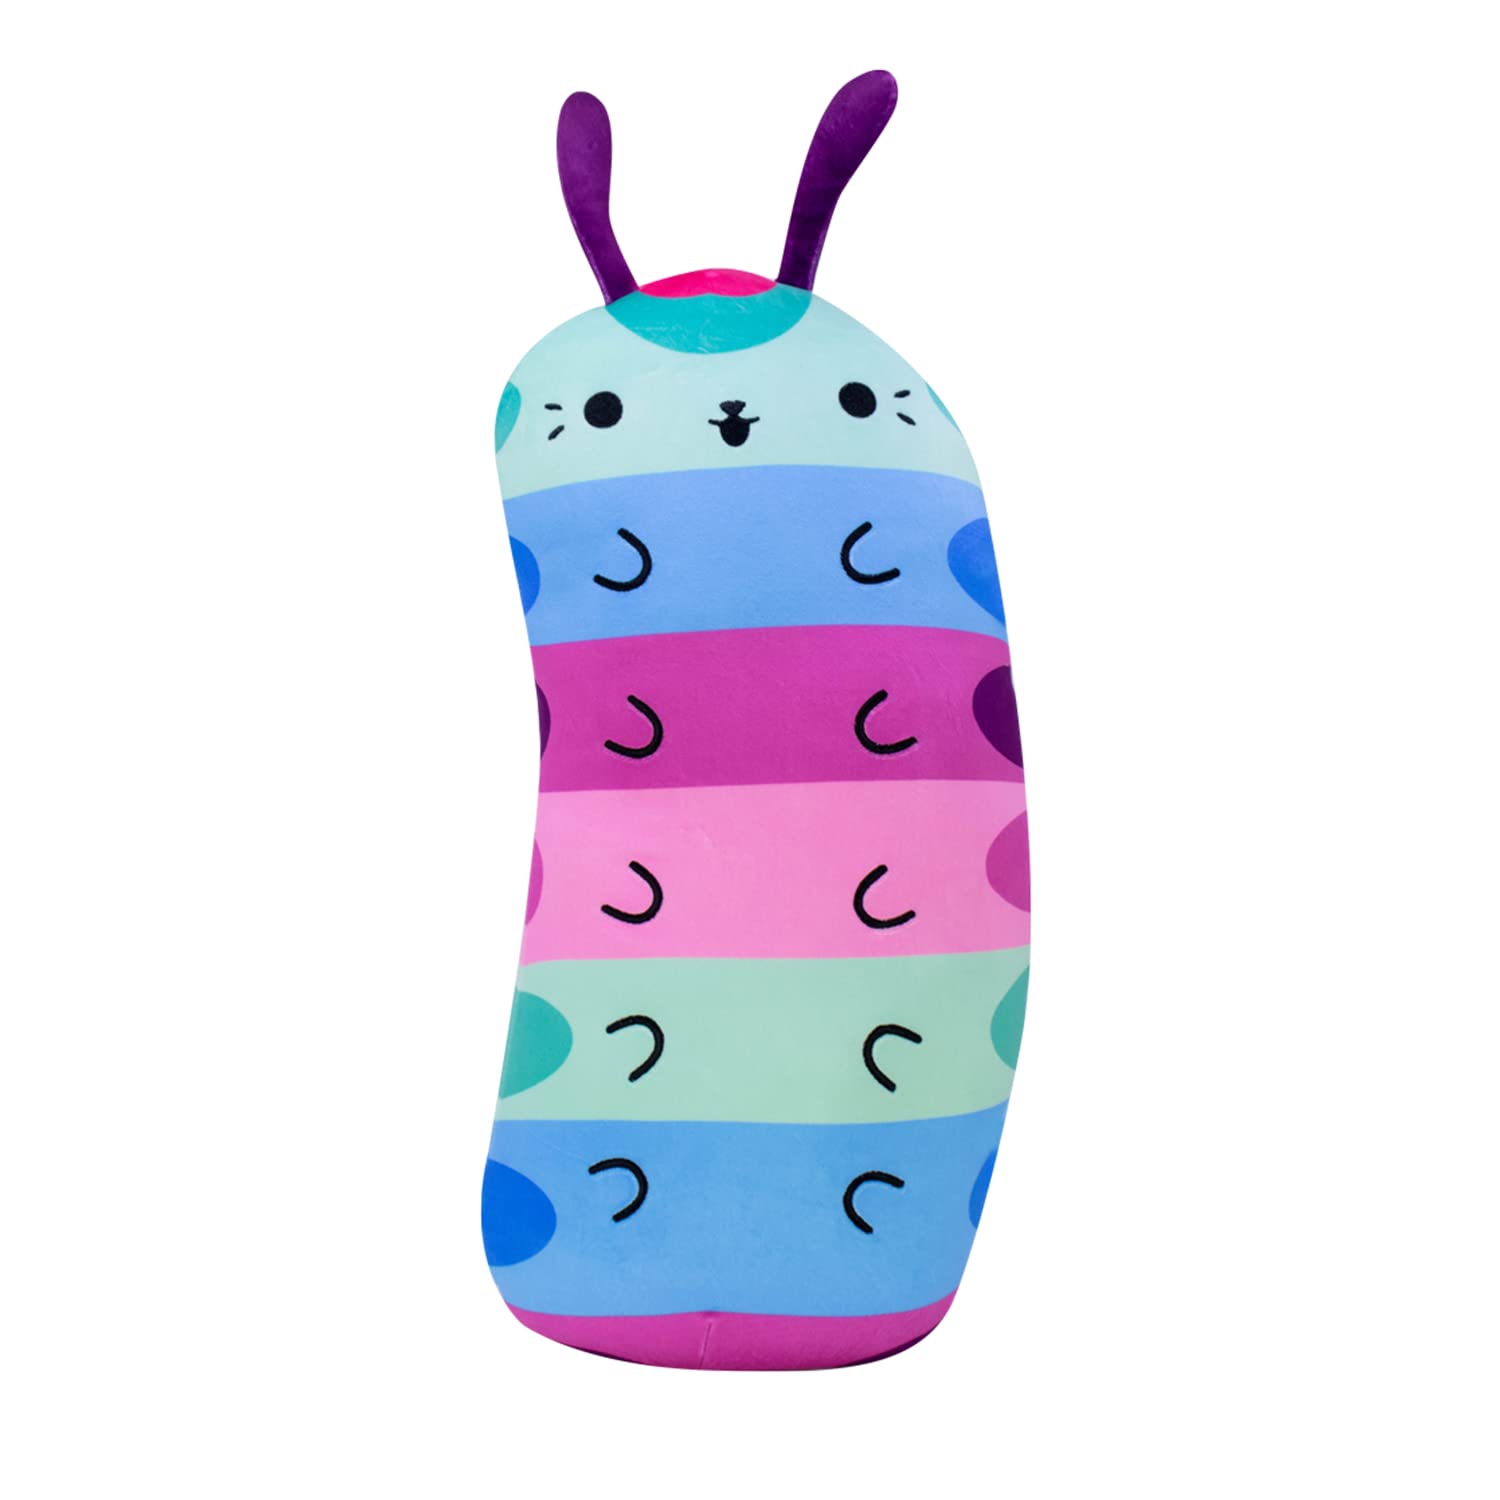 Super-Soft 17 Caterpillar Plush - Perfect Cuddle Buddy for Kids! Use as Bedroom Decor, Bed Pillows, or Calming Toys!